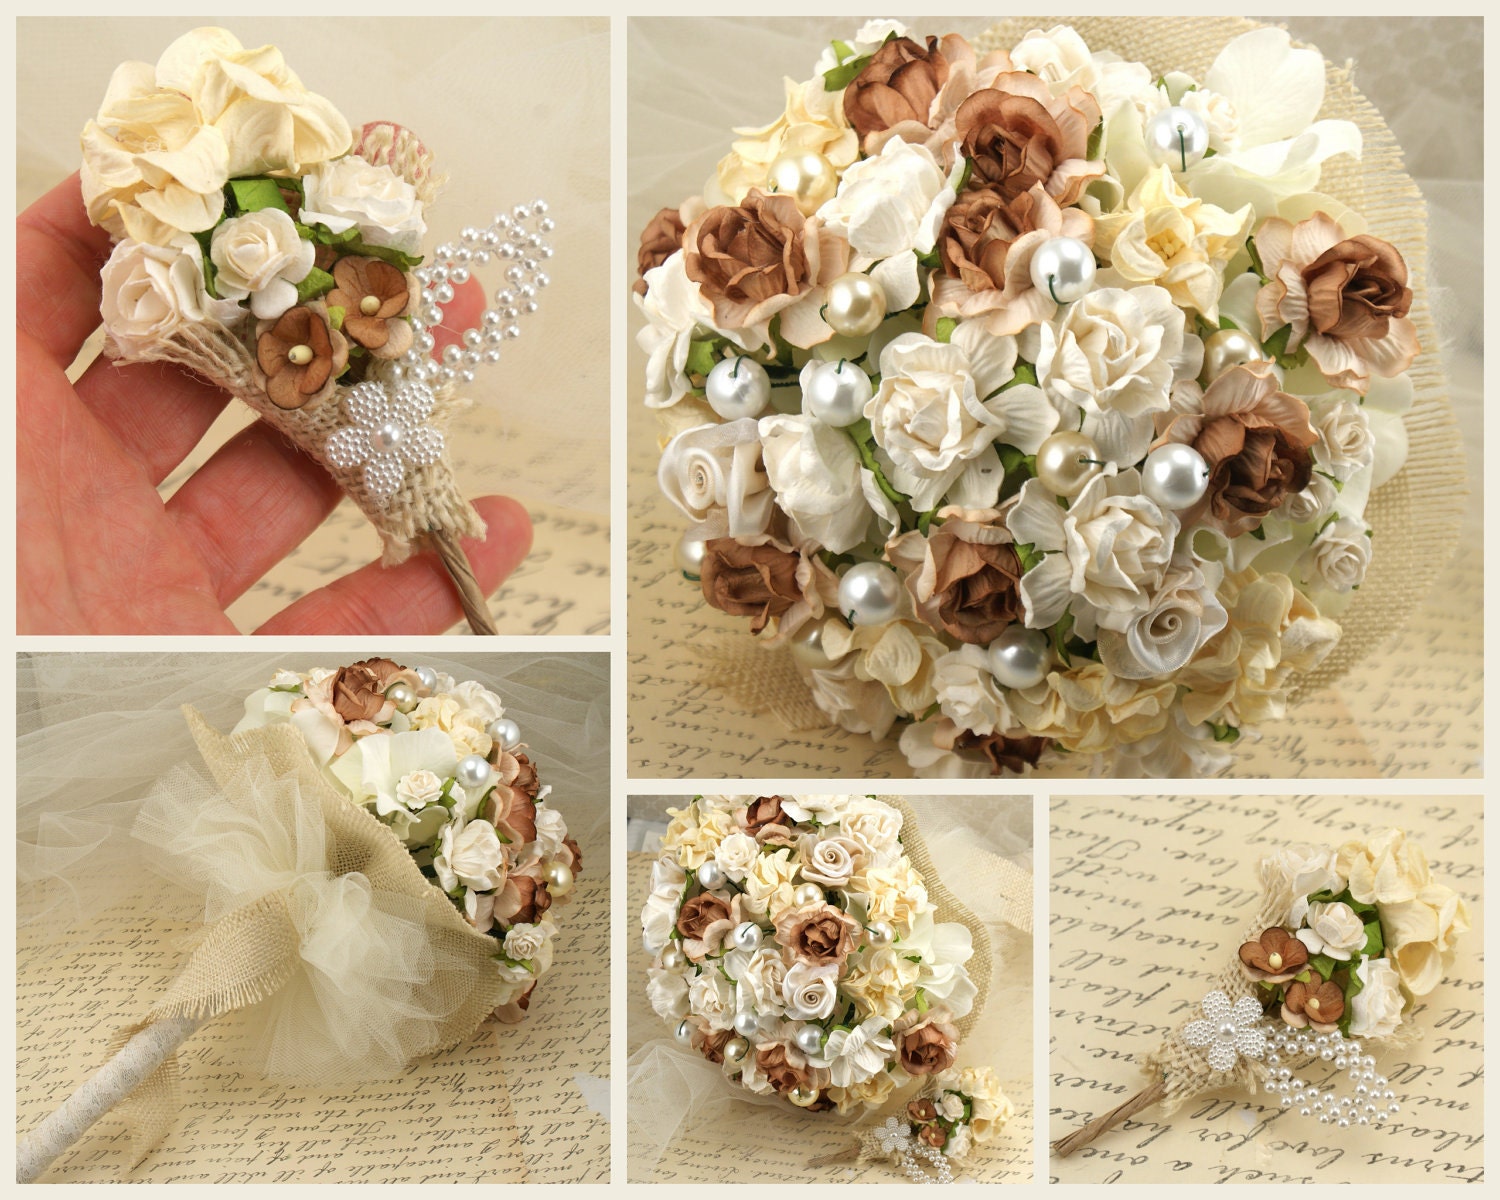 Bridal Bouquet- Paper, Fabric and Pearl Bouquet Shabby Chic Rustic Wedding in Ivory, Cream and Champagne - SolBijou